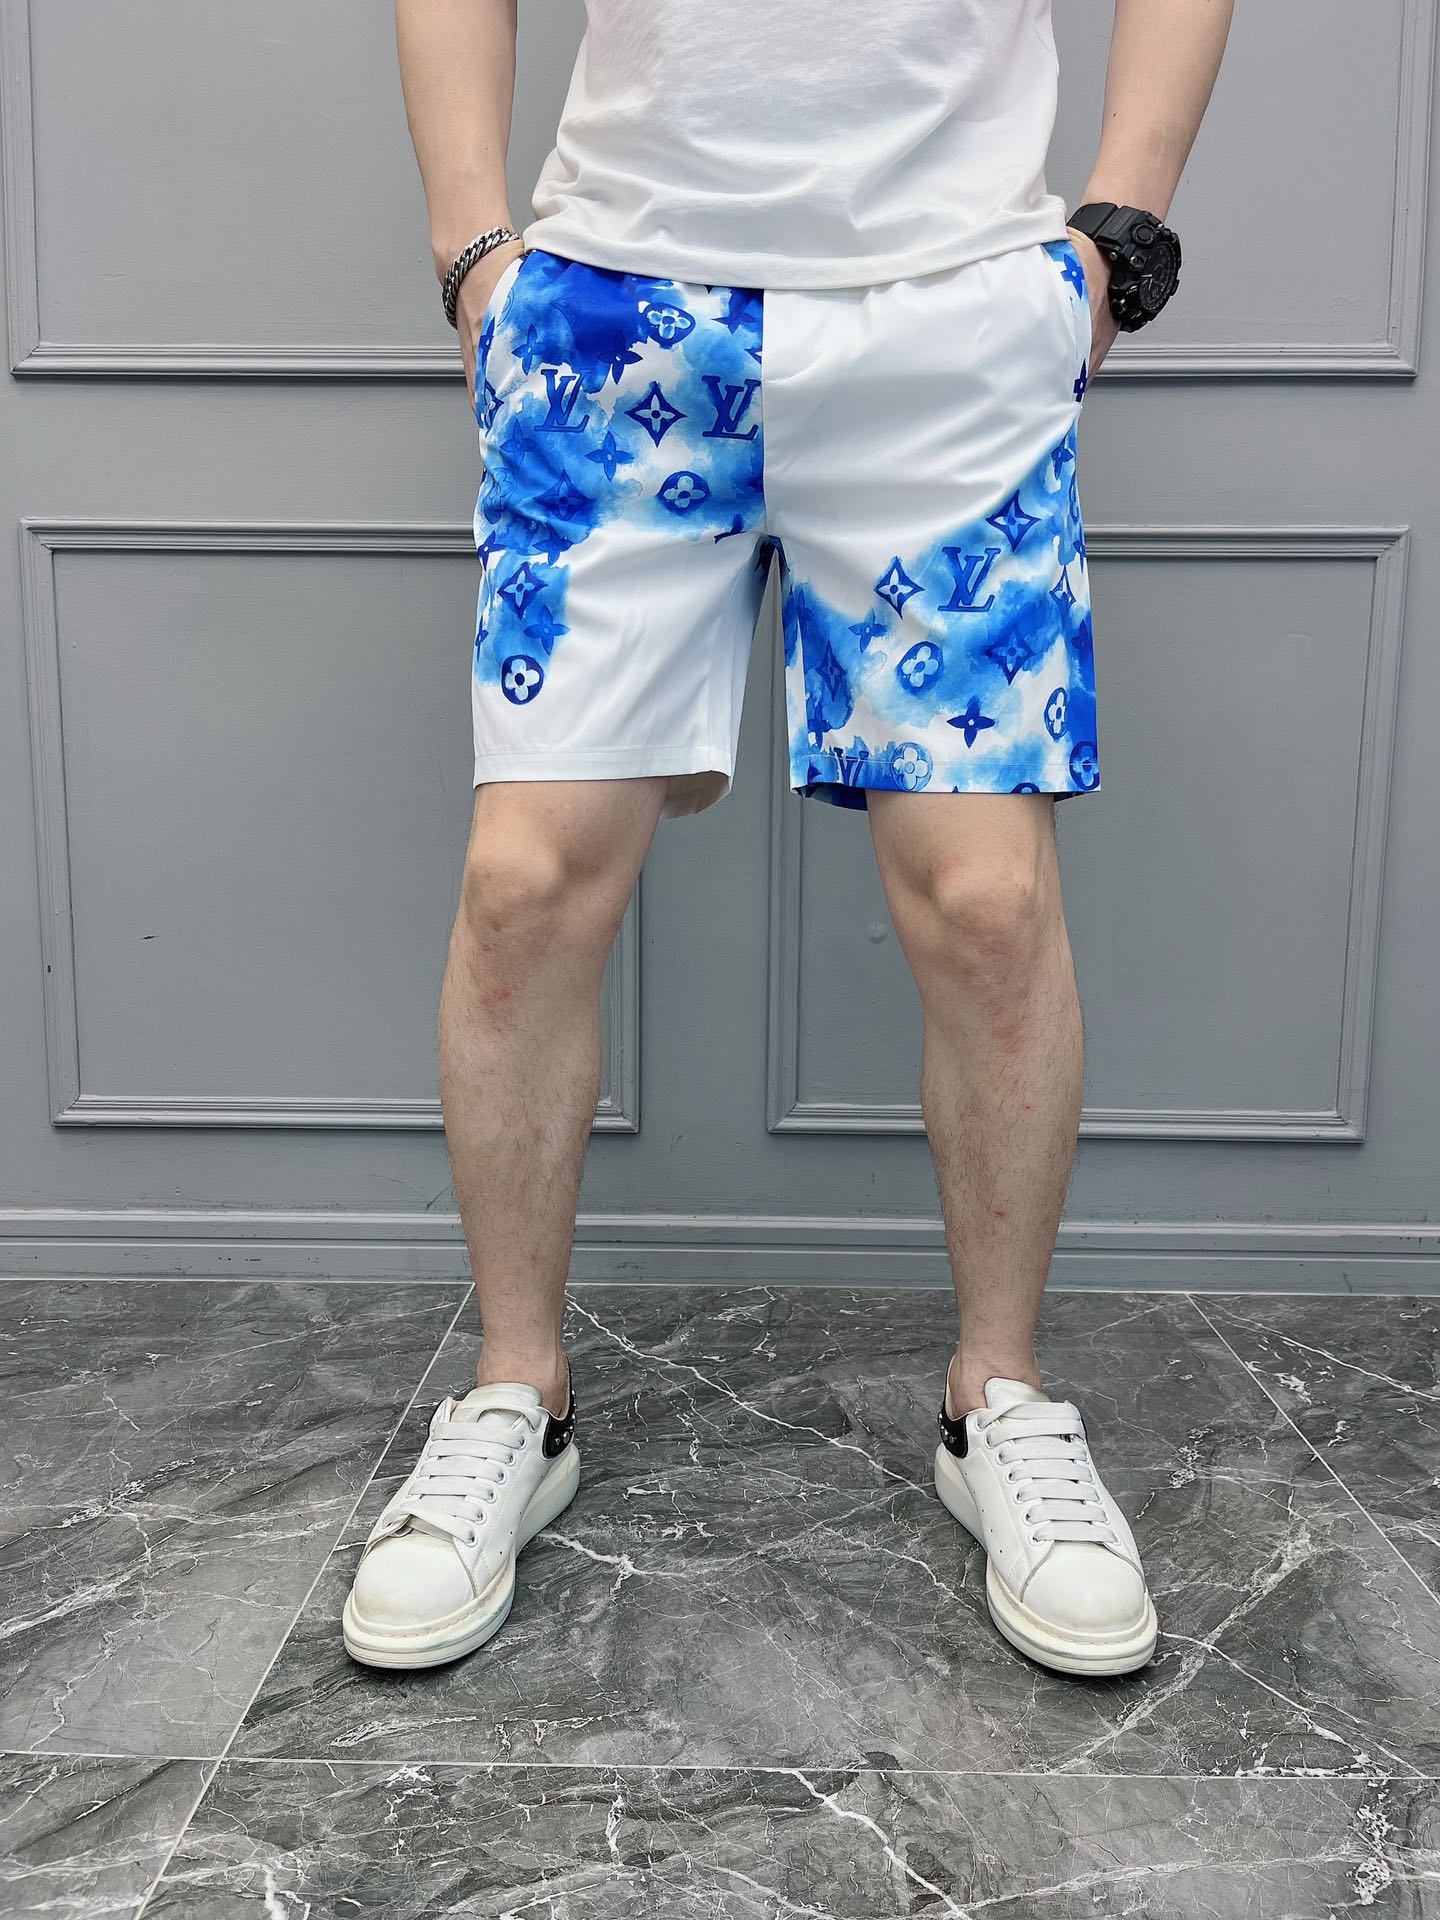 Louis Vuitton Clothing Shorts Online China
 Printing Men Summer Collection Fashion Beach